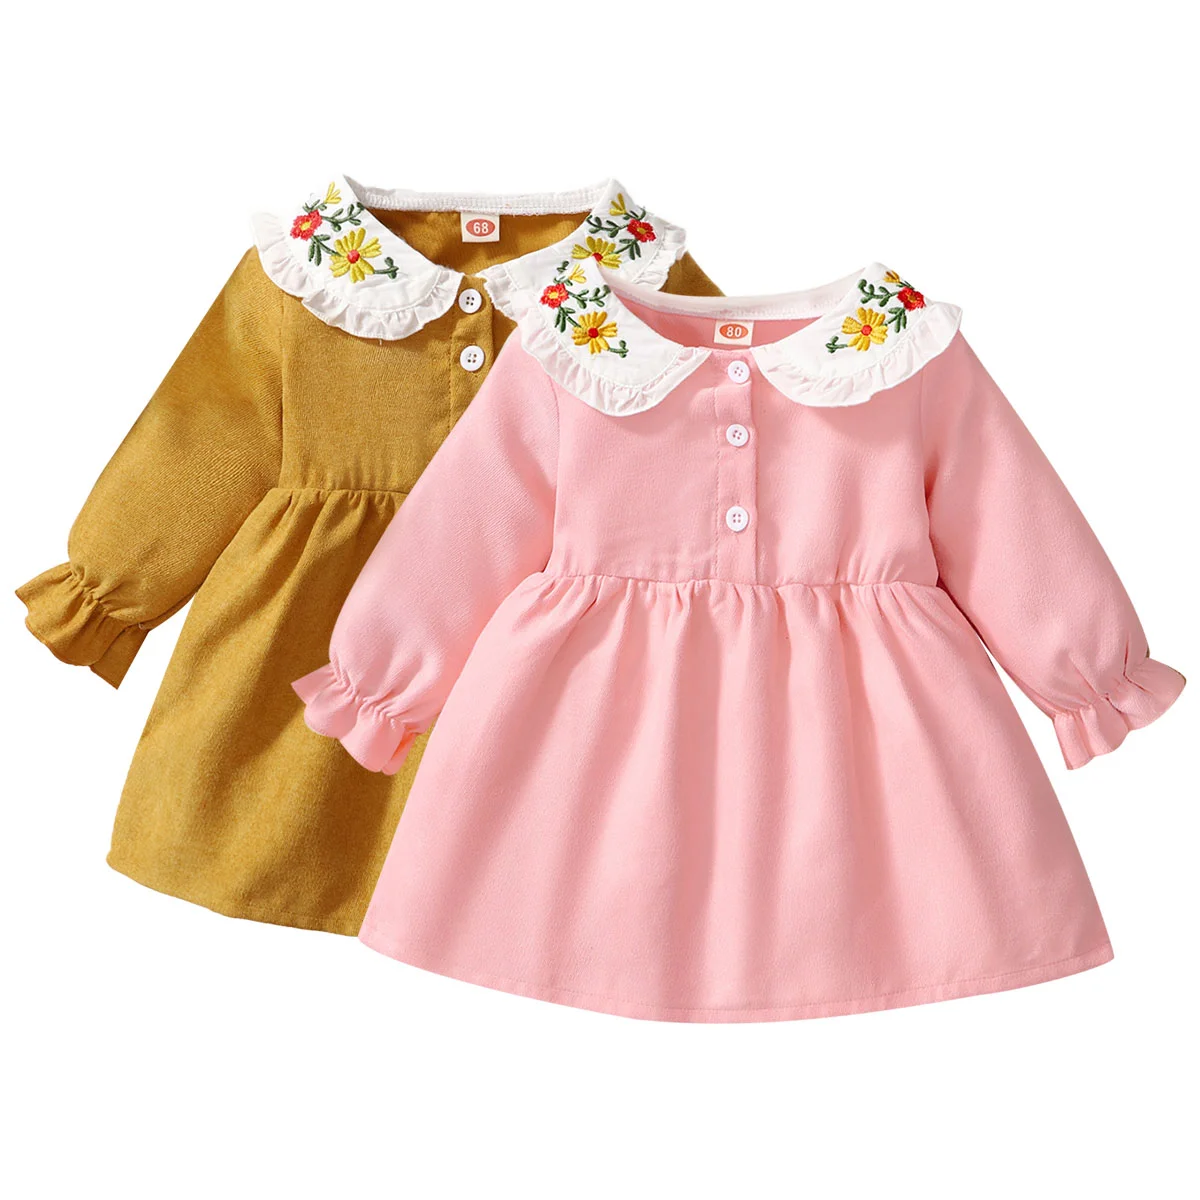 Infant Baby Girl Clothes Long Sleeve Princess Dress Newborn Baby Girl Spring Fashion Clothing Toddler Girl Leisure Dresses